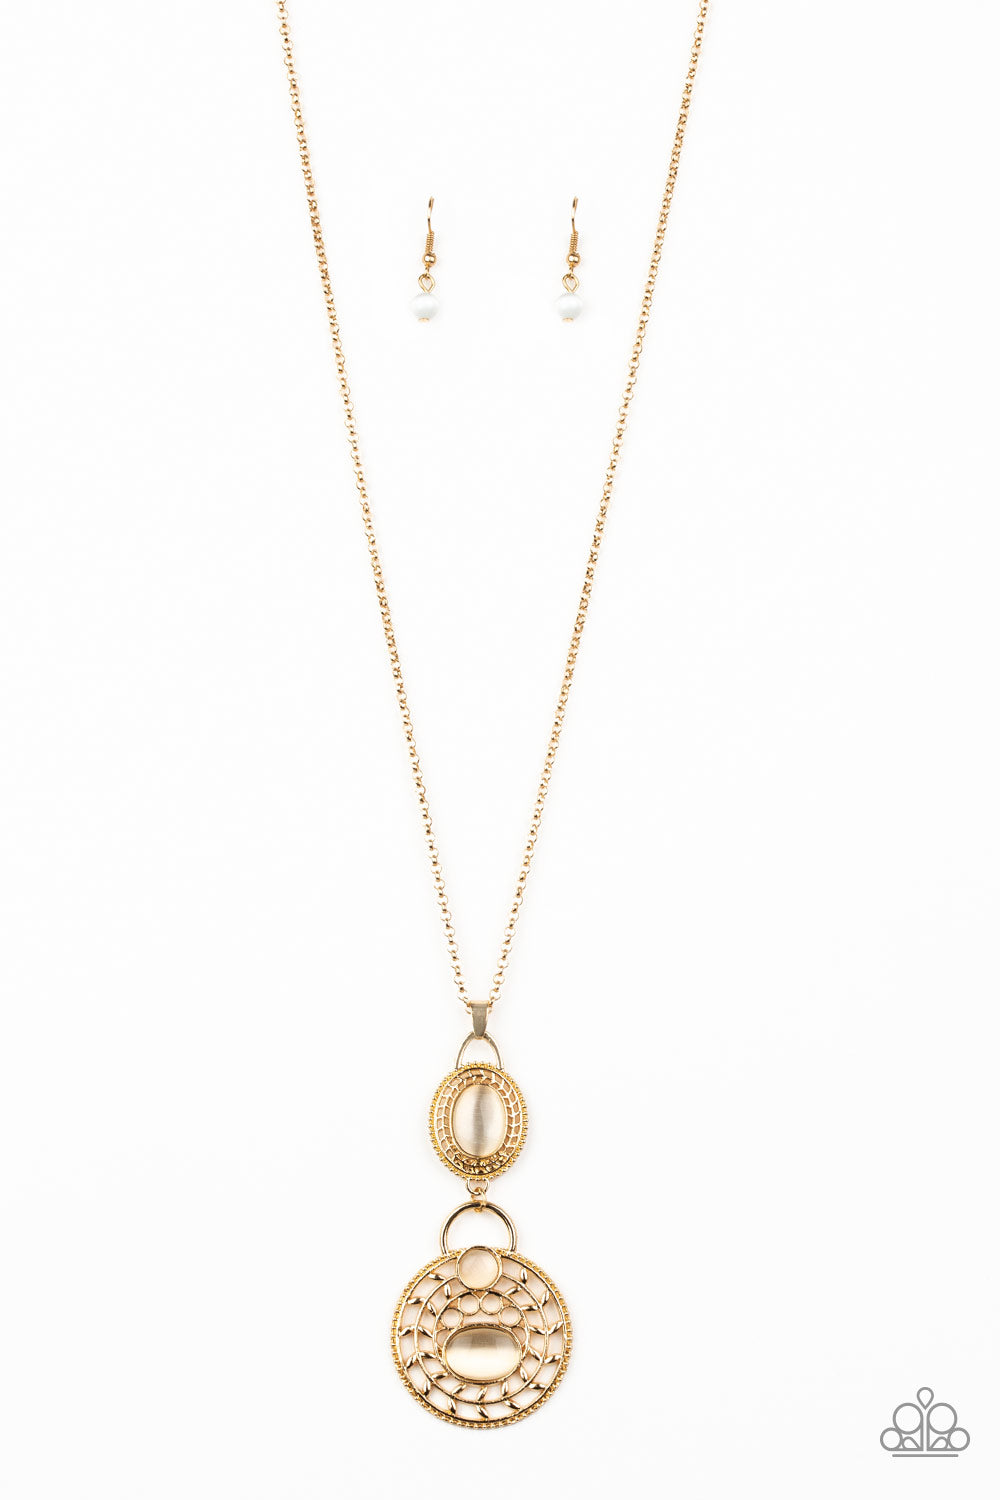 Hook, VINE, and Sinker - Gold Necklace - Paparazzi Accessories